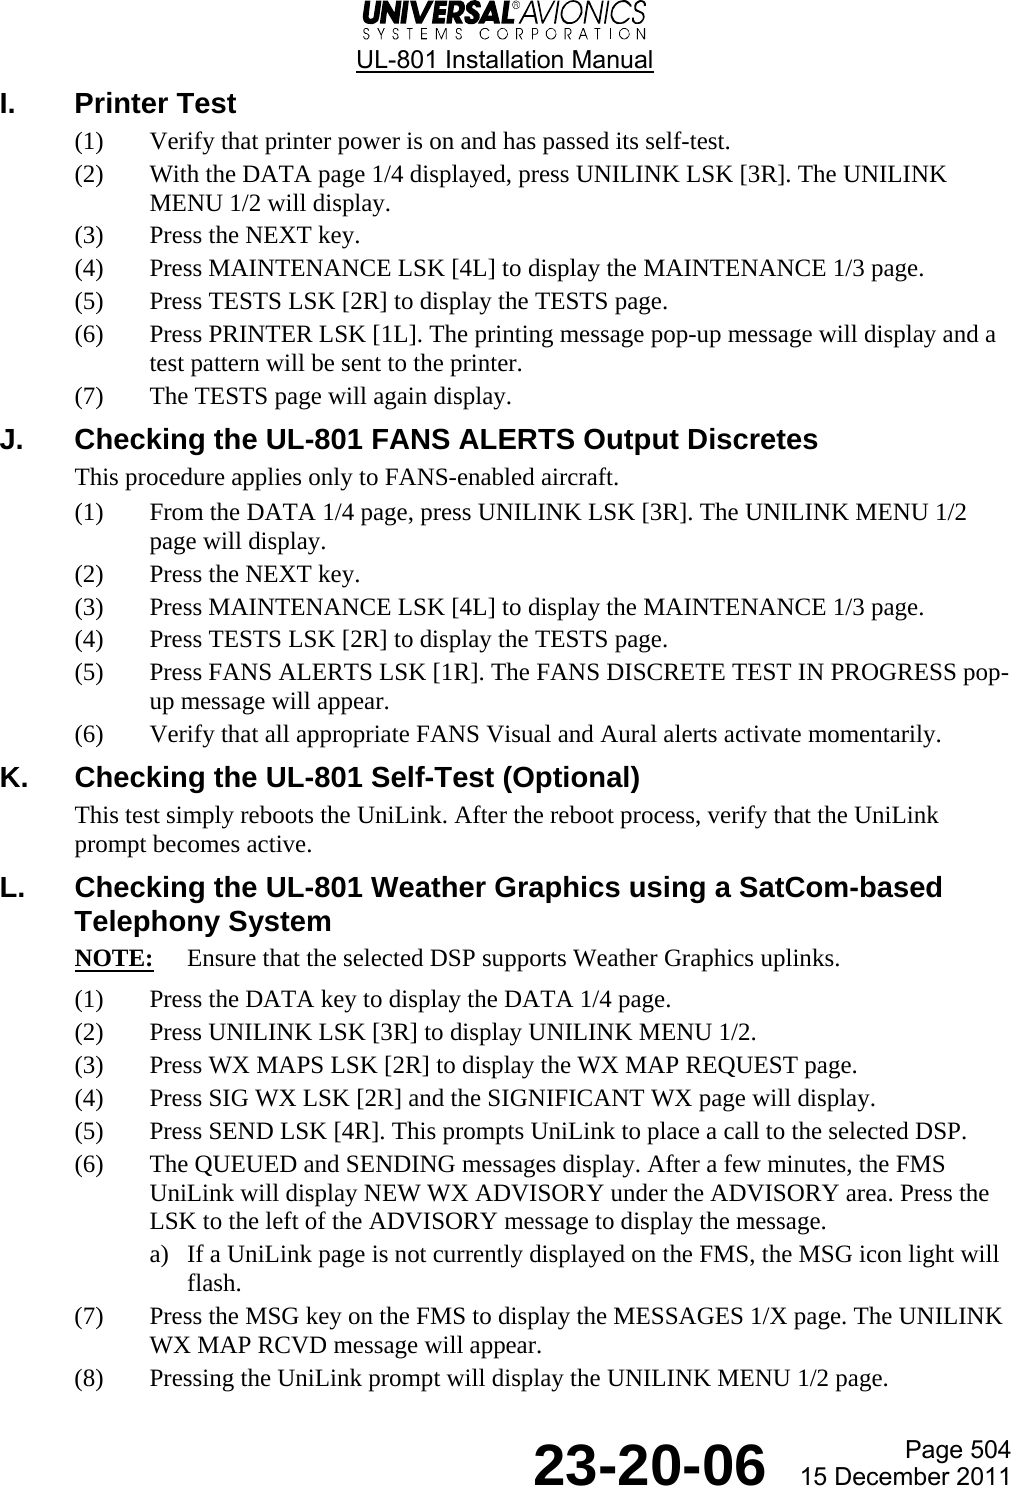  UL-801 Installation Manual  Page 504  23-20-06  15 December 2011 I. Printer Test (1) Verify that printer power is on and has passed its self-test. (2) With the DATA page 1/4 displayed, press UNILINK LSK [3R]. The UNILINK MENU 1/2 will display. (3) Press the NEXT key. (4) Press MAINTENANCE LSK [4L] to display the MAINTENANCE 1/3 page.  (5) Press TESTS LSK [2R] to display the TESTS page. (6) Press PRINTER LSK [1L]. The printing message pop-up message will display and a test pattern will be sent to the printer. (7) The TESTS page will again display. J.  Checking the UL-801 FANS ALERTS Output Discretes This procedure applies only to FANS-enabled aircraft. (1) From the DATA 1/4 page, press UNILINK LSK [3R]. The UNILINK MENU 1/2 page will display. (2) Press the NEXT key. (3) Press MAINTENANCE LSK [4L] to display the MAINTENANCE 1/3 page. (4) Press TESTS LSK [2R] to display the TESTS page. (5) Press FANS ALERTS LSK [1R]. The FANS DISCRETE TEST IN PROGRESS pop-up message will appear. (6) Verify that all appropriate FANS Visual and Aural alerts activate momentarily. K.  Checking the UL-801 Self-Test (Optional) This test simply reboots the UniLink. After the reboot process, verify that the UniLink prompt becomes active. L.  Checking the UL-801 Weather Graphics using a SatCom-based Telephony System NOTE:  Ensure that the selected DSP supports Weather Graphics uplinks. (1) Press the DATA key to display the DATA 1/4 page. (2) Press UNILINK LSK [3R] to display UNILINK MENU 1/2. (3) Press WX MAPS LSK [2R] to display the WX MAP REQUEST page. (4) Press SIG WX LSK [2R] and the SIGNIFICANT WX page will display. (5) Press SEND LSK [4R]. This prompts UniLink to place a call to the selected DSP. (6) The QUEUED and SENDING messages display. After a few minutes, the FMS UniLink will display NEW WX ADVISORY under the ADVISORY area. Press the LSK to the left of the ADVISORY message to display the message. a) If a UniLink page is not currently displayed on the FMS, the MSG icon light will flash. (7) Press the MSG key on the FMS to display the MESSAGES 1/X page. The UNILINK WX MAP RCVD message will appear. (8) Pressing the UniLink prompt will display the UNILINK MENU 1/2 page. 